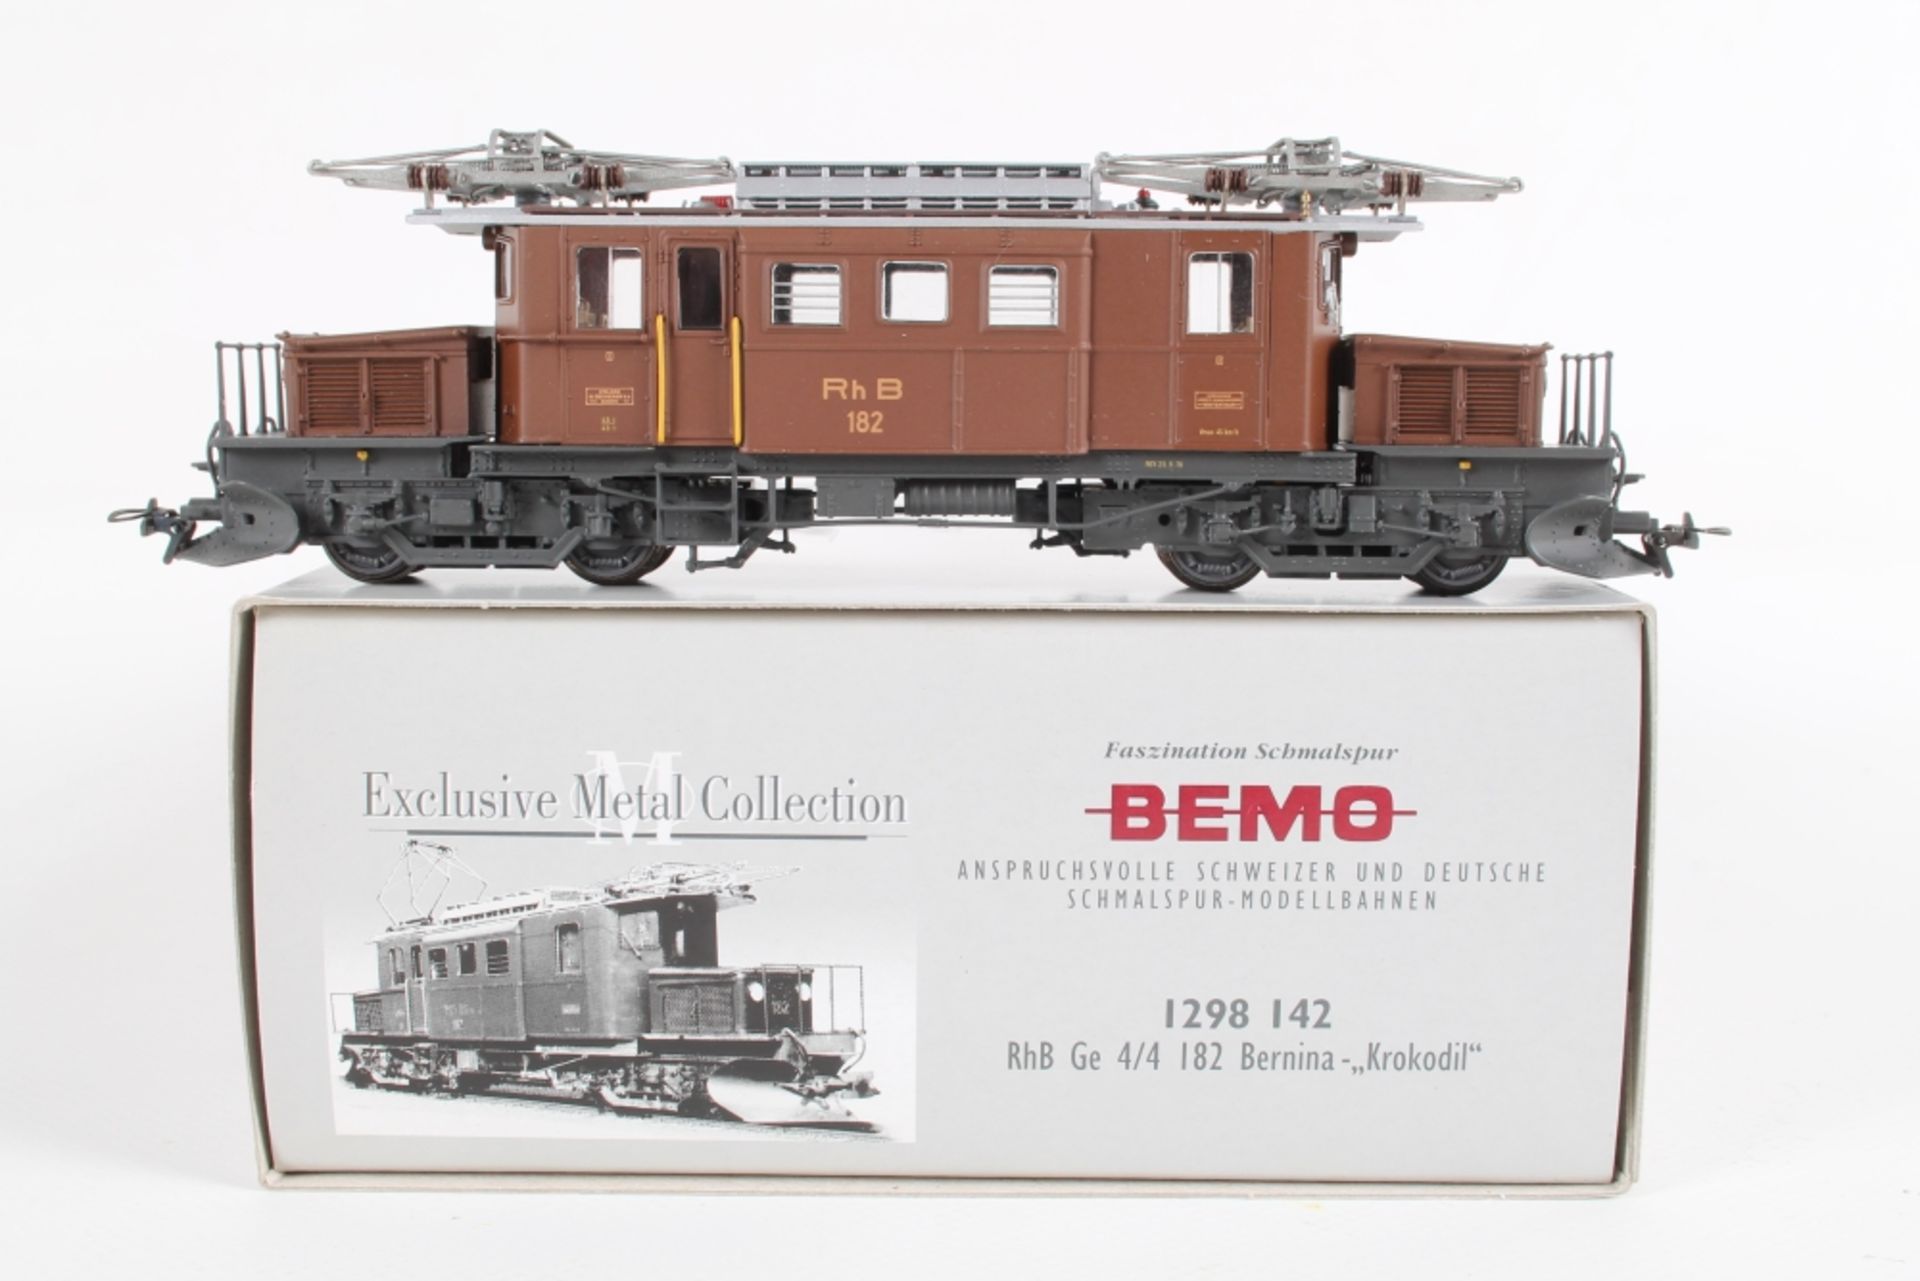 Bemo Exclusiv Metal Collection, 1298 142 - Image 2 of 2